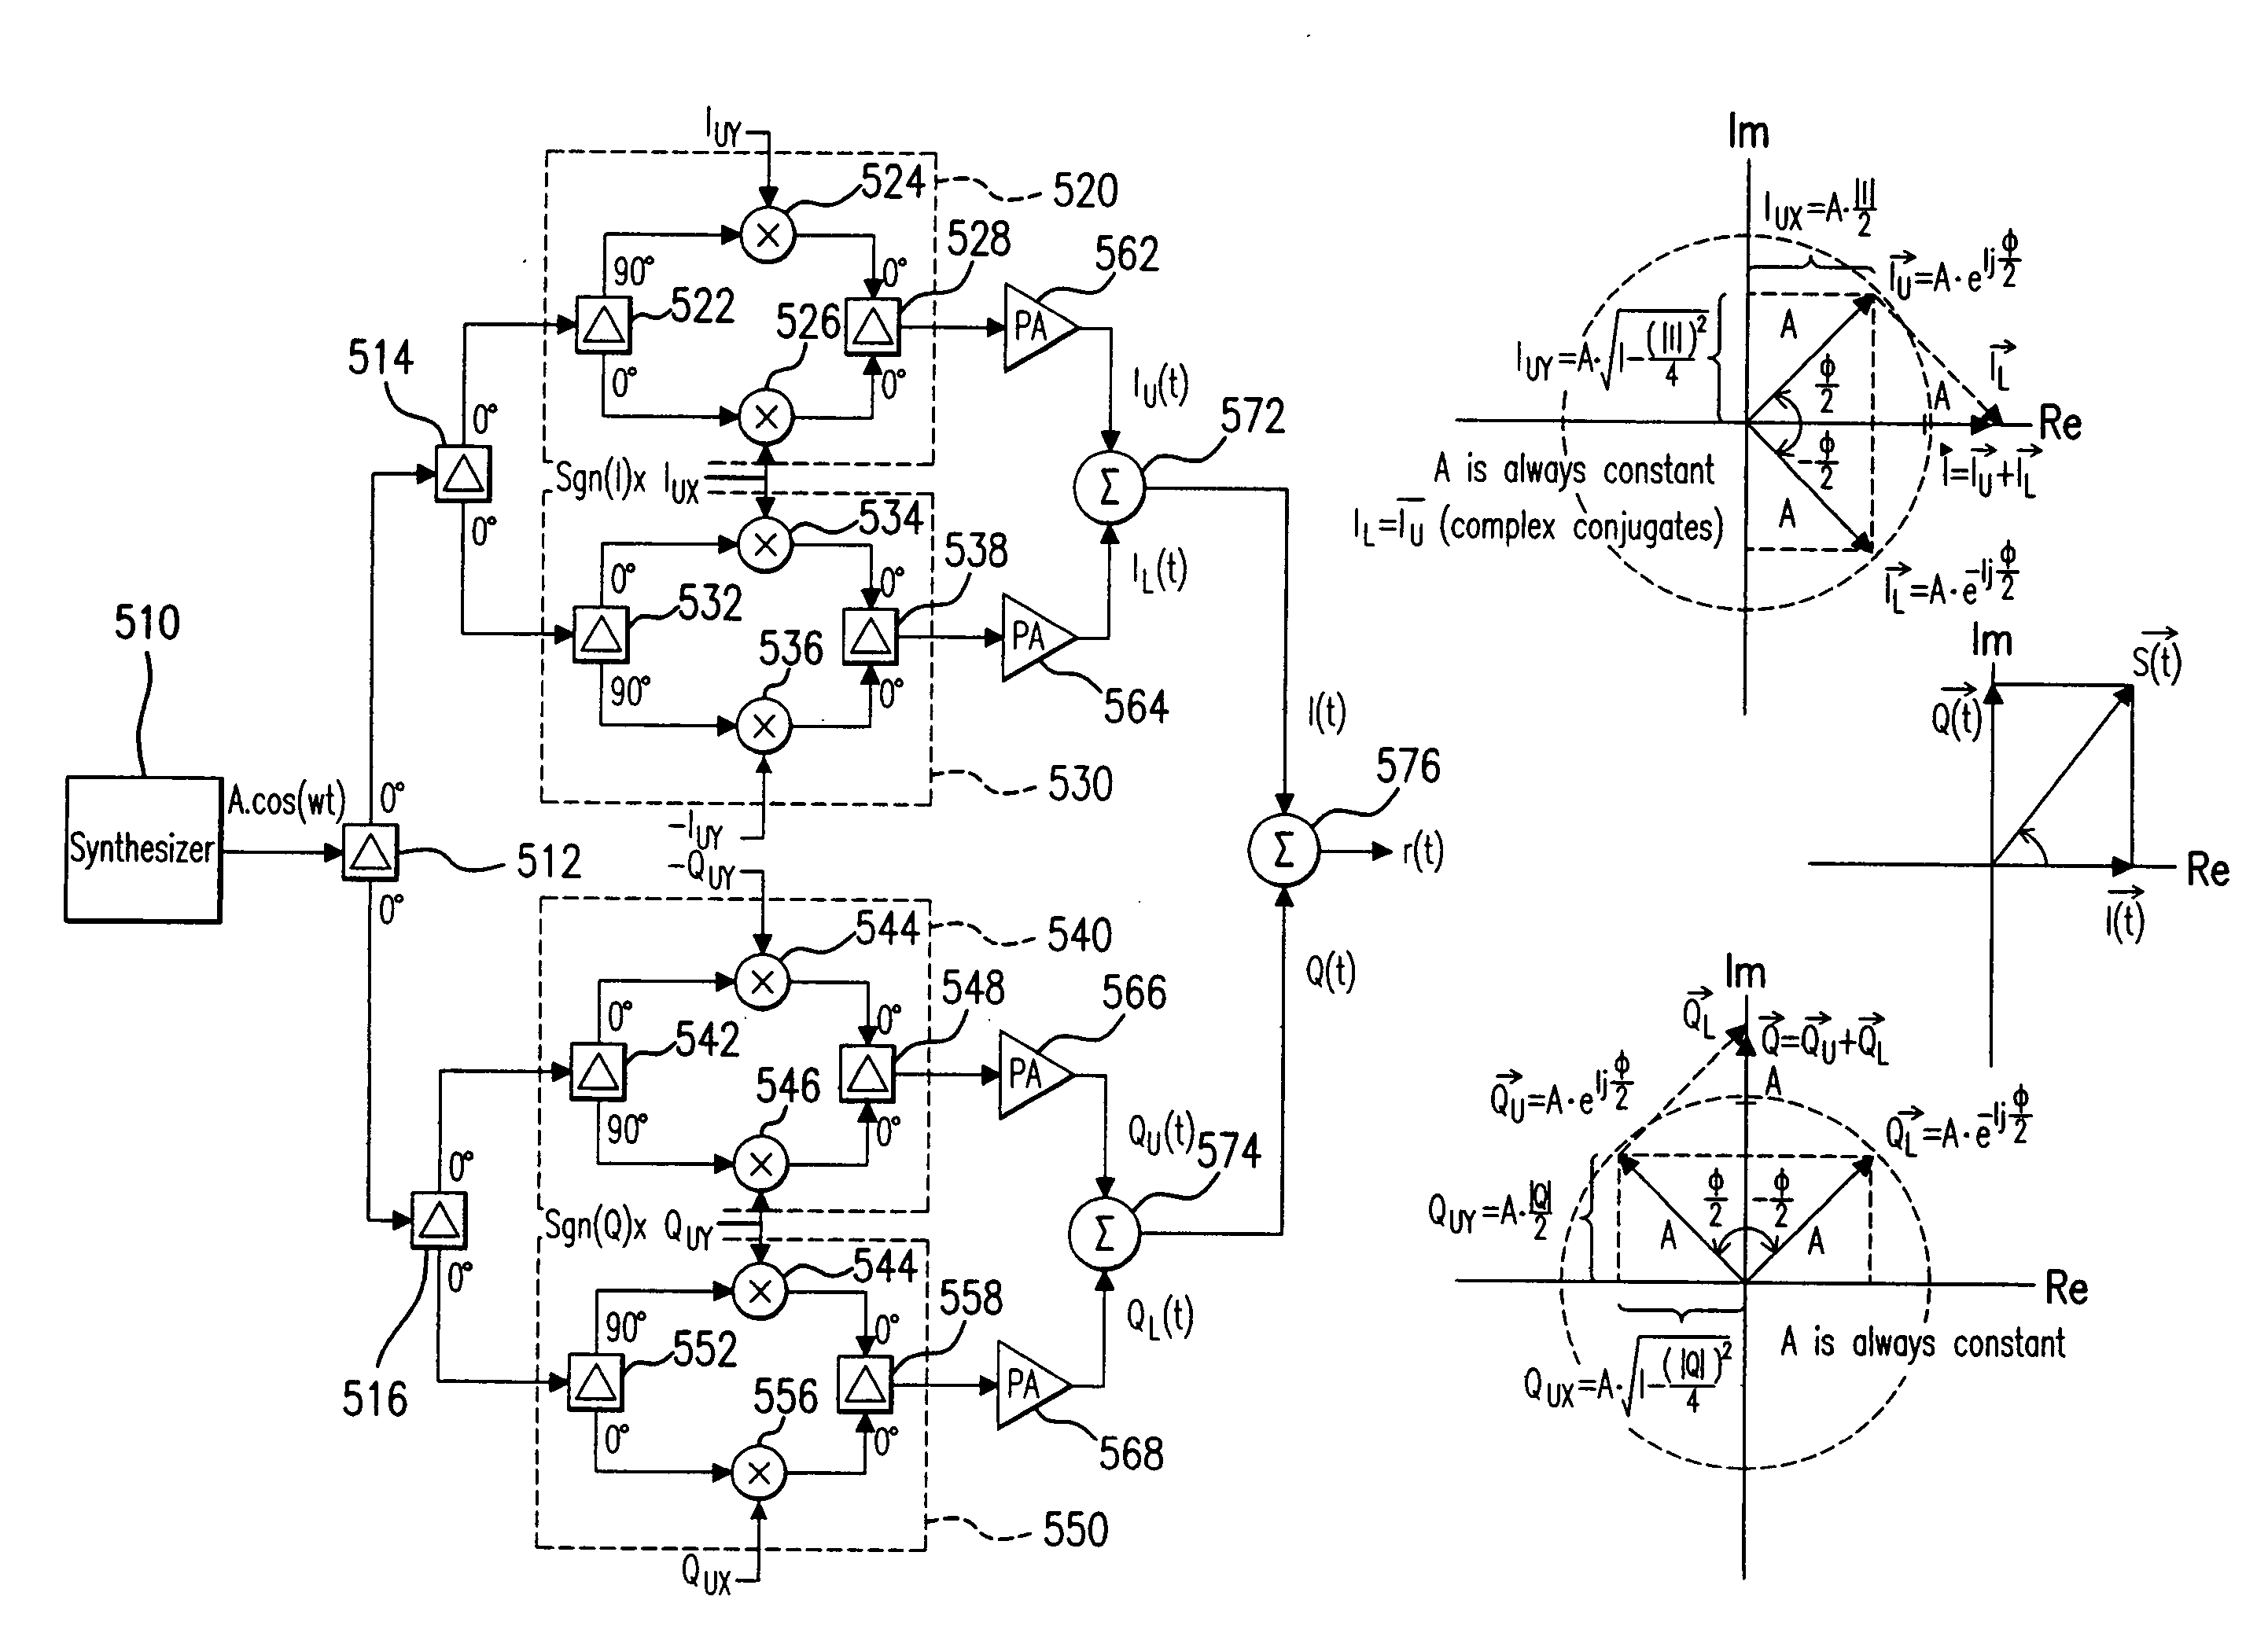 RF power transmission, modulation, and amplification embodiments